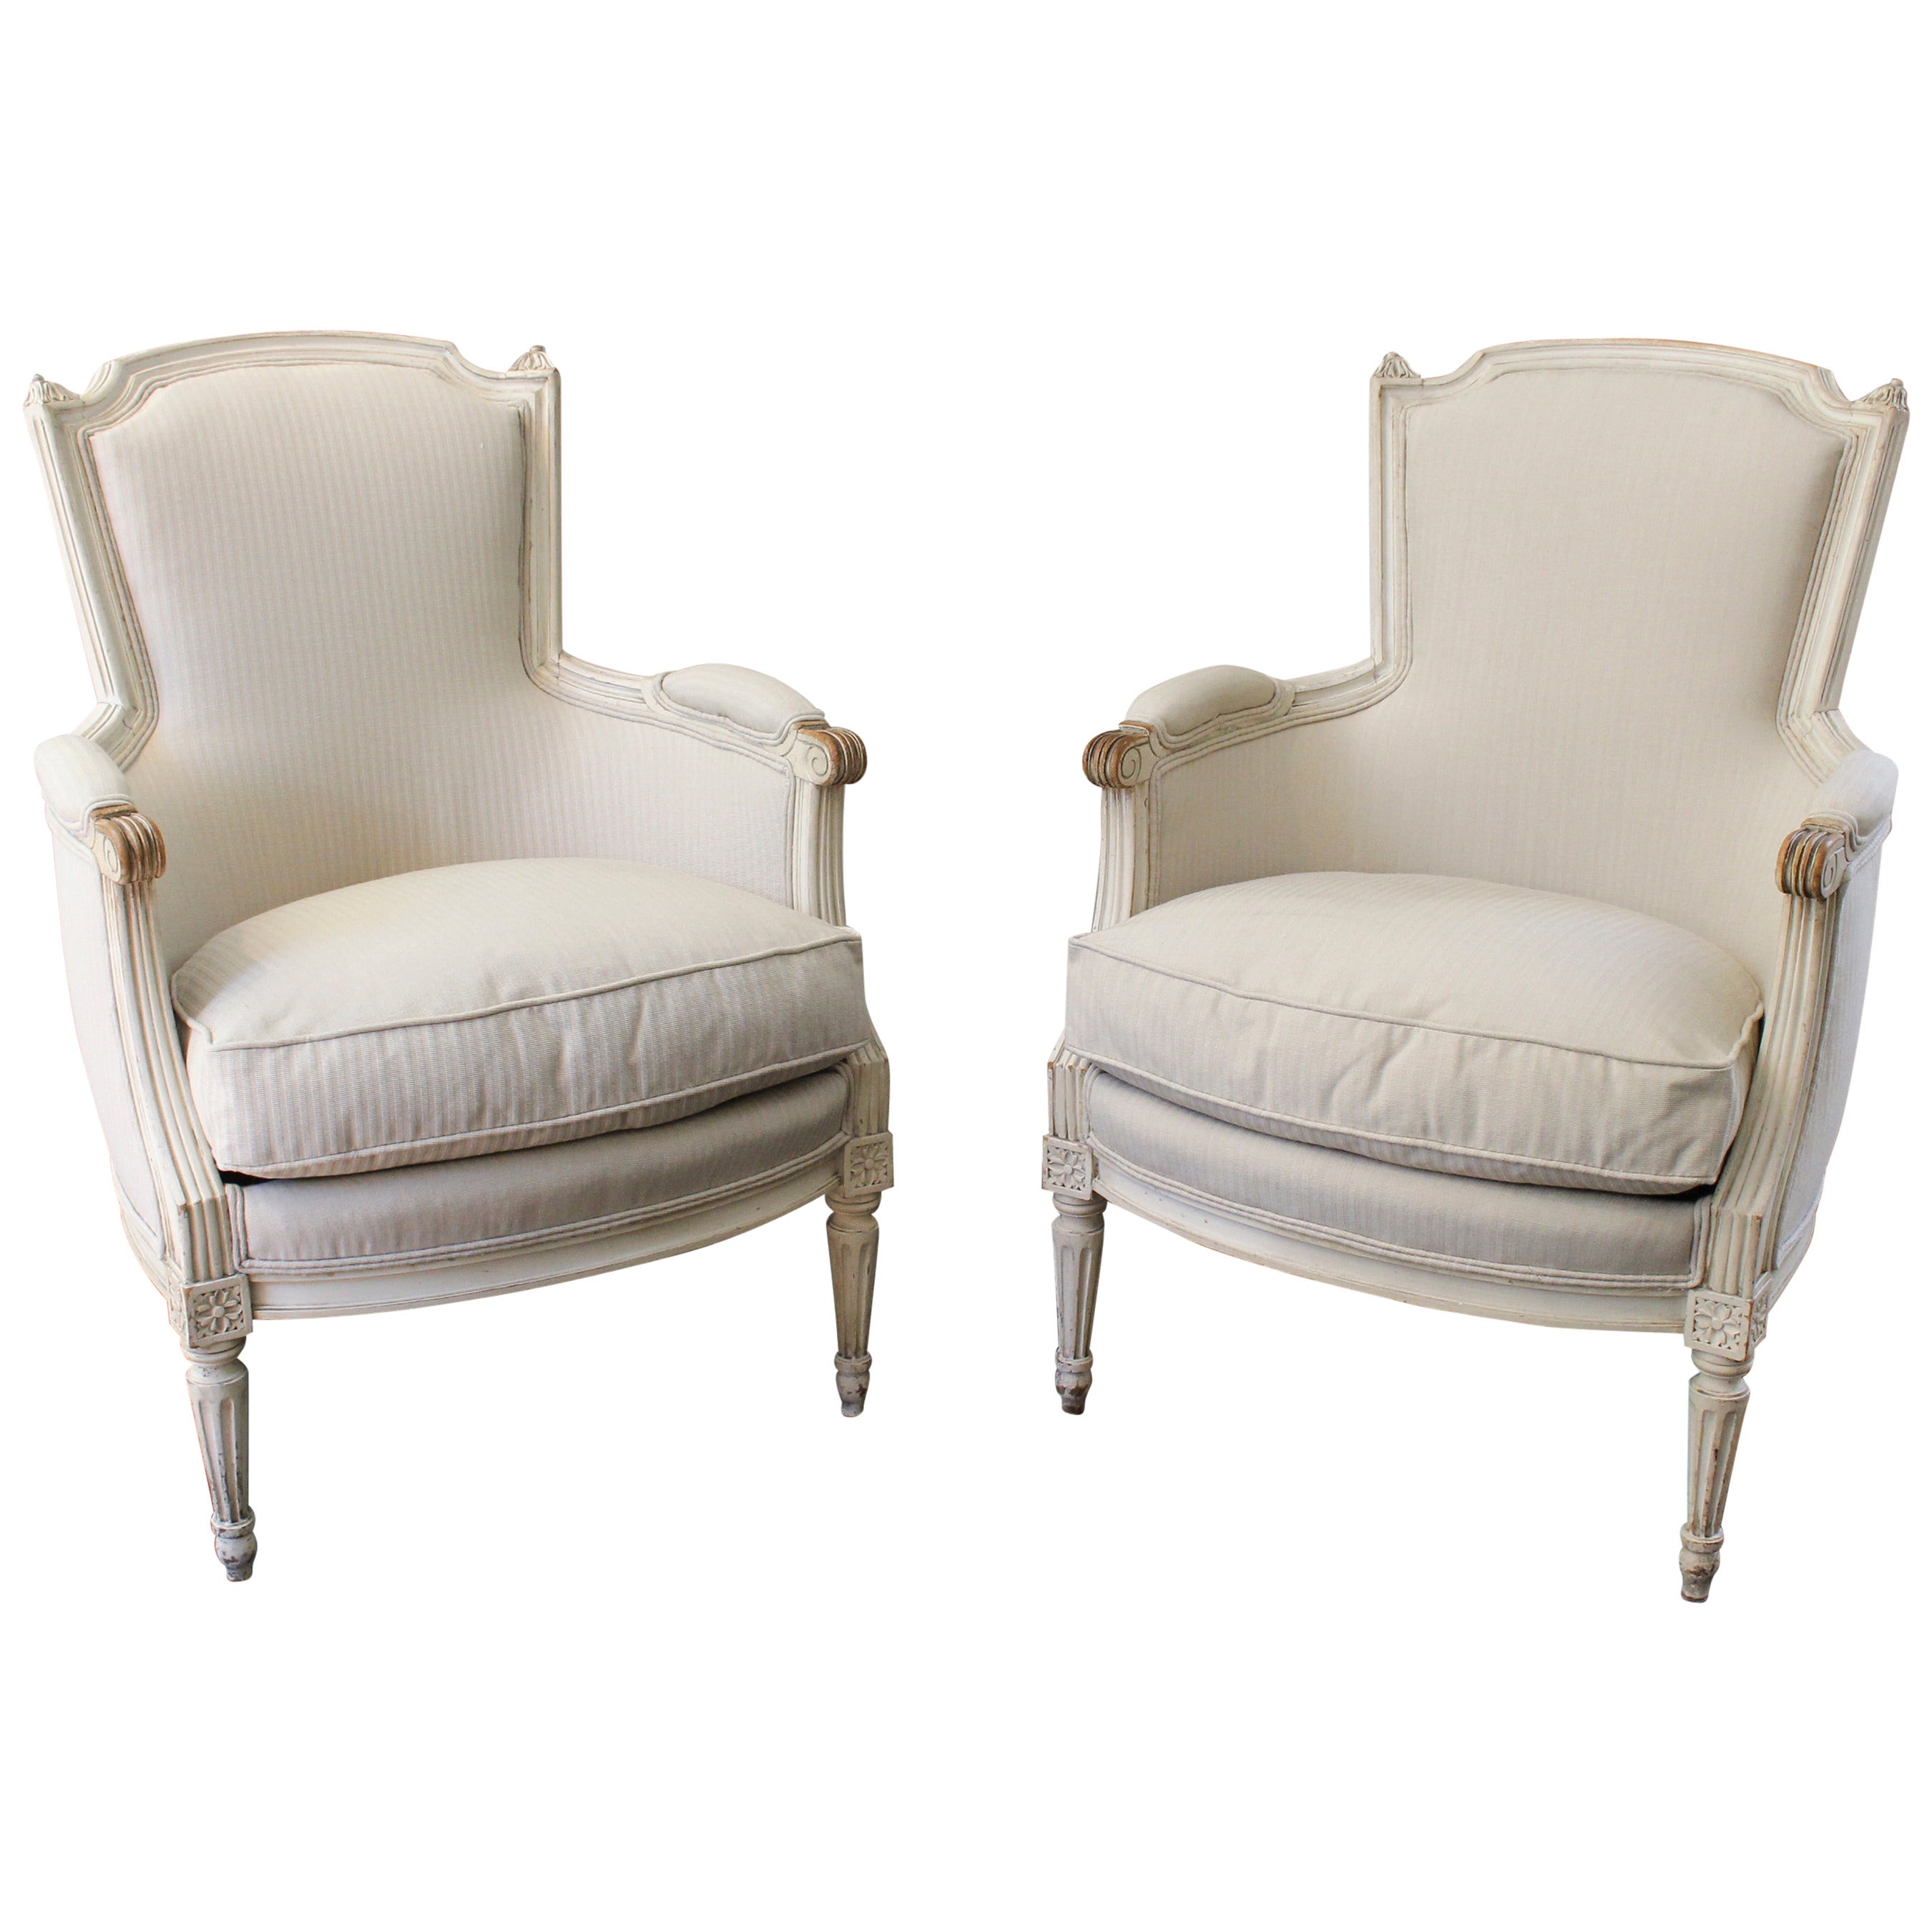 Pair of 19th Century France Bergeres